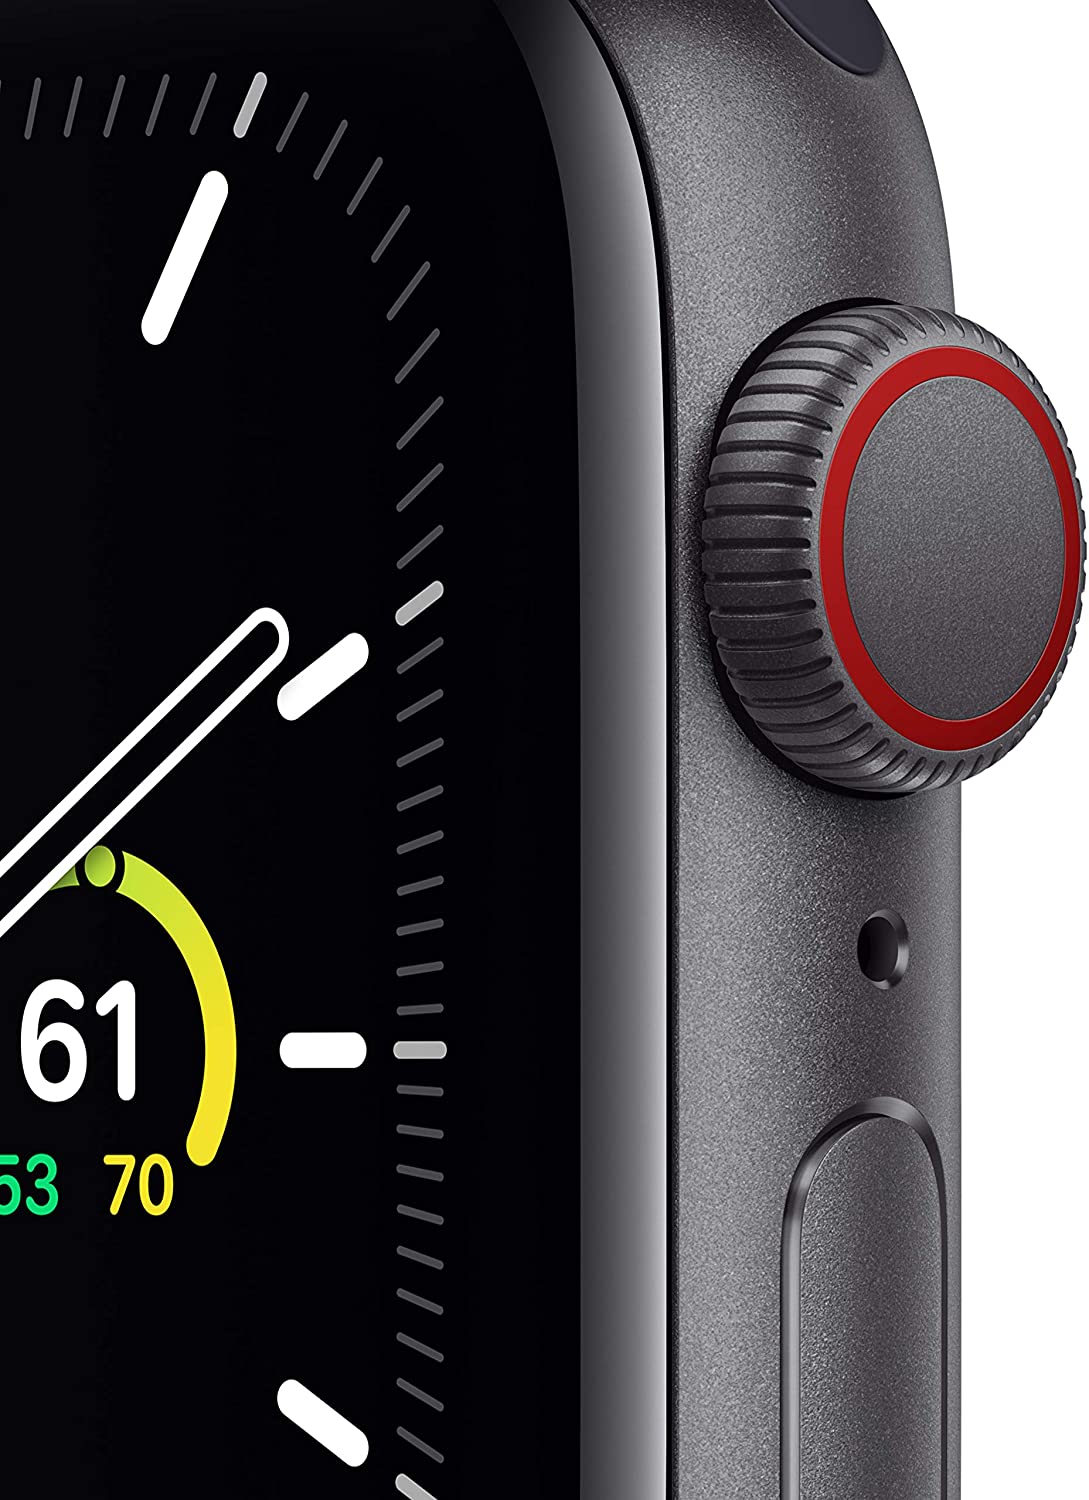 New Apple Watch SE (GPS + Cellular, 40mm) - Space Gray Aluminum Case with Charcoal Sport Loop